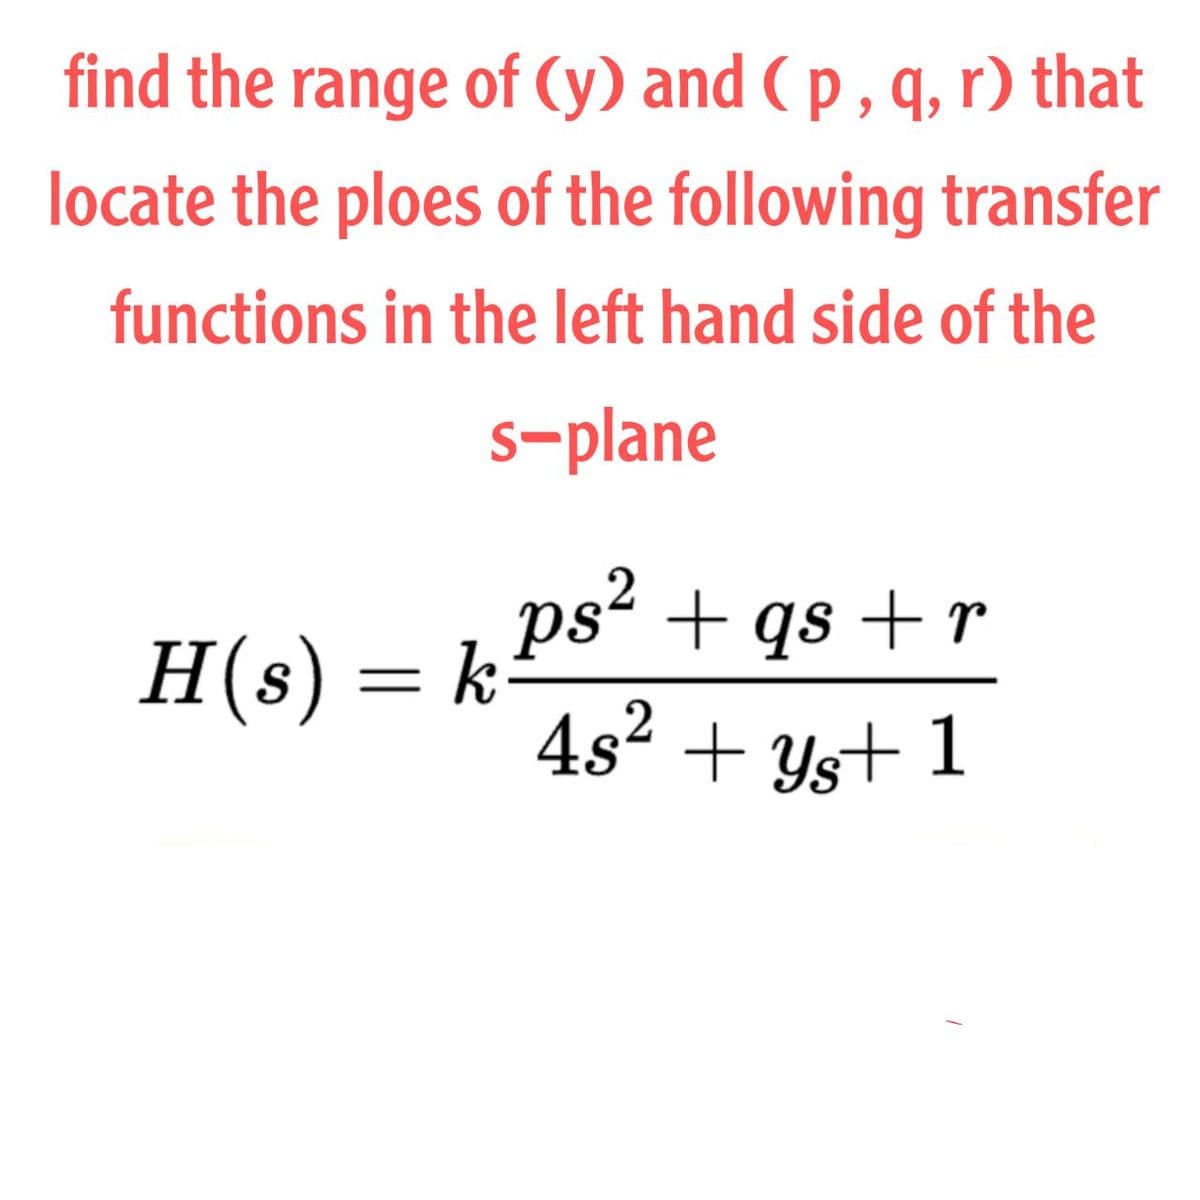 find the range of (y) and ( p , q, r) that
locate the ploes of the following transfer
functions in the left hand side of the
s-plane
ps + qs + r
4s2 + Ys+ 1
H(s) = k
